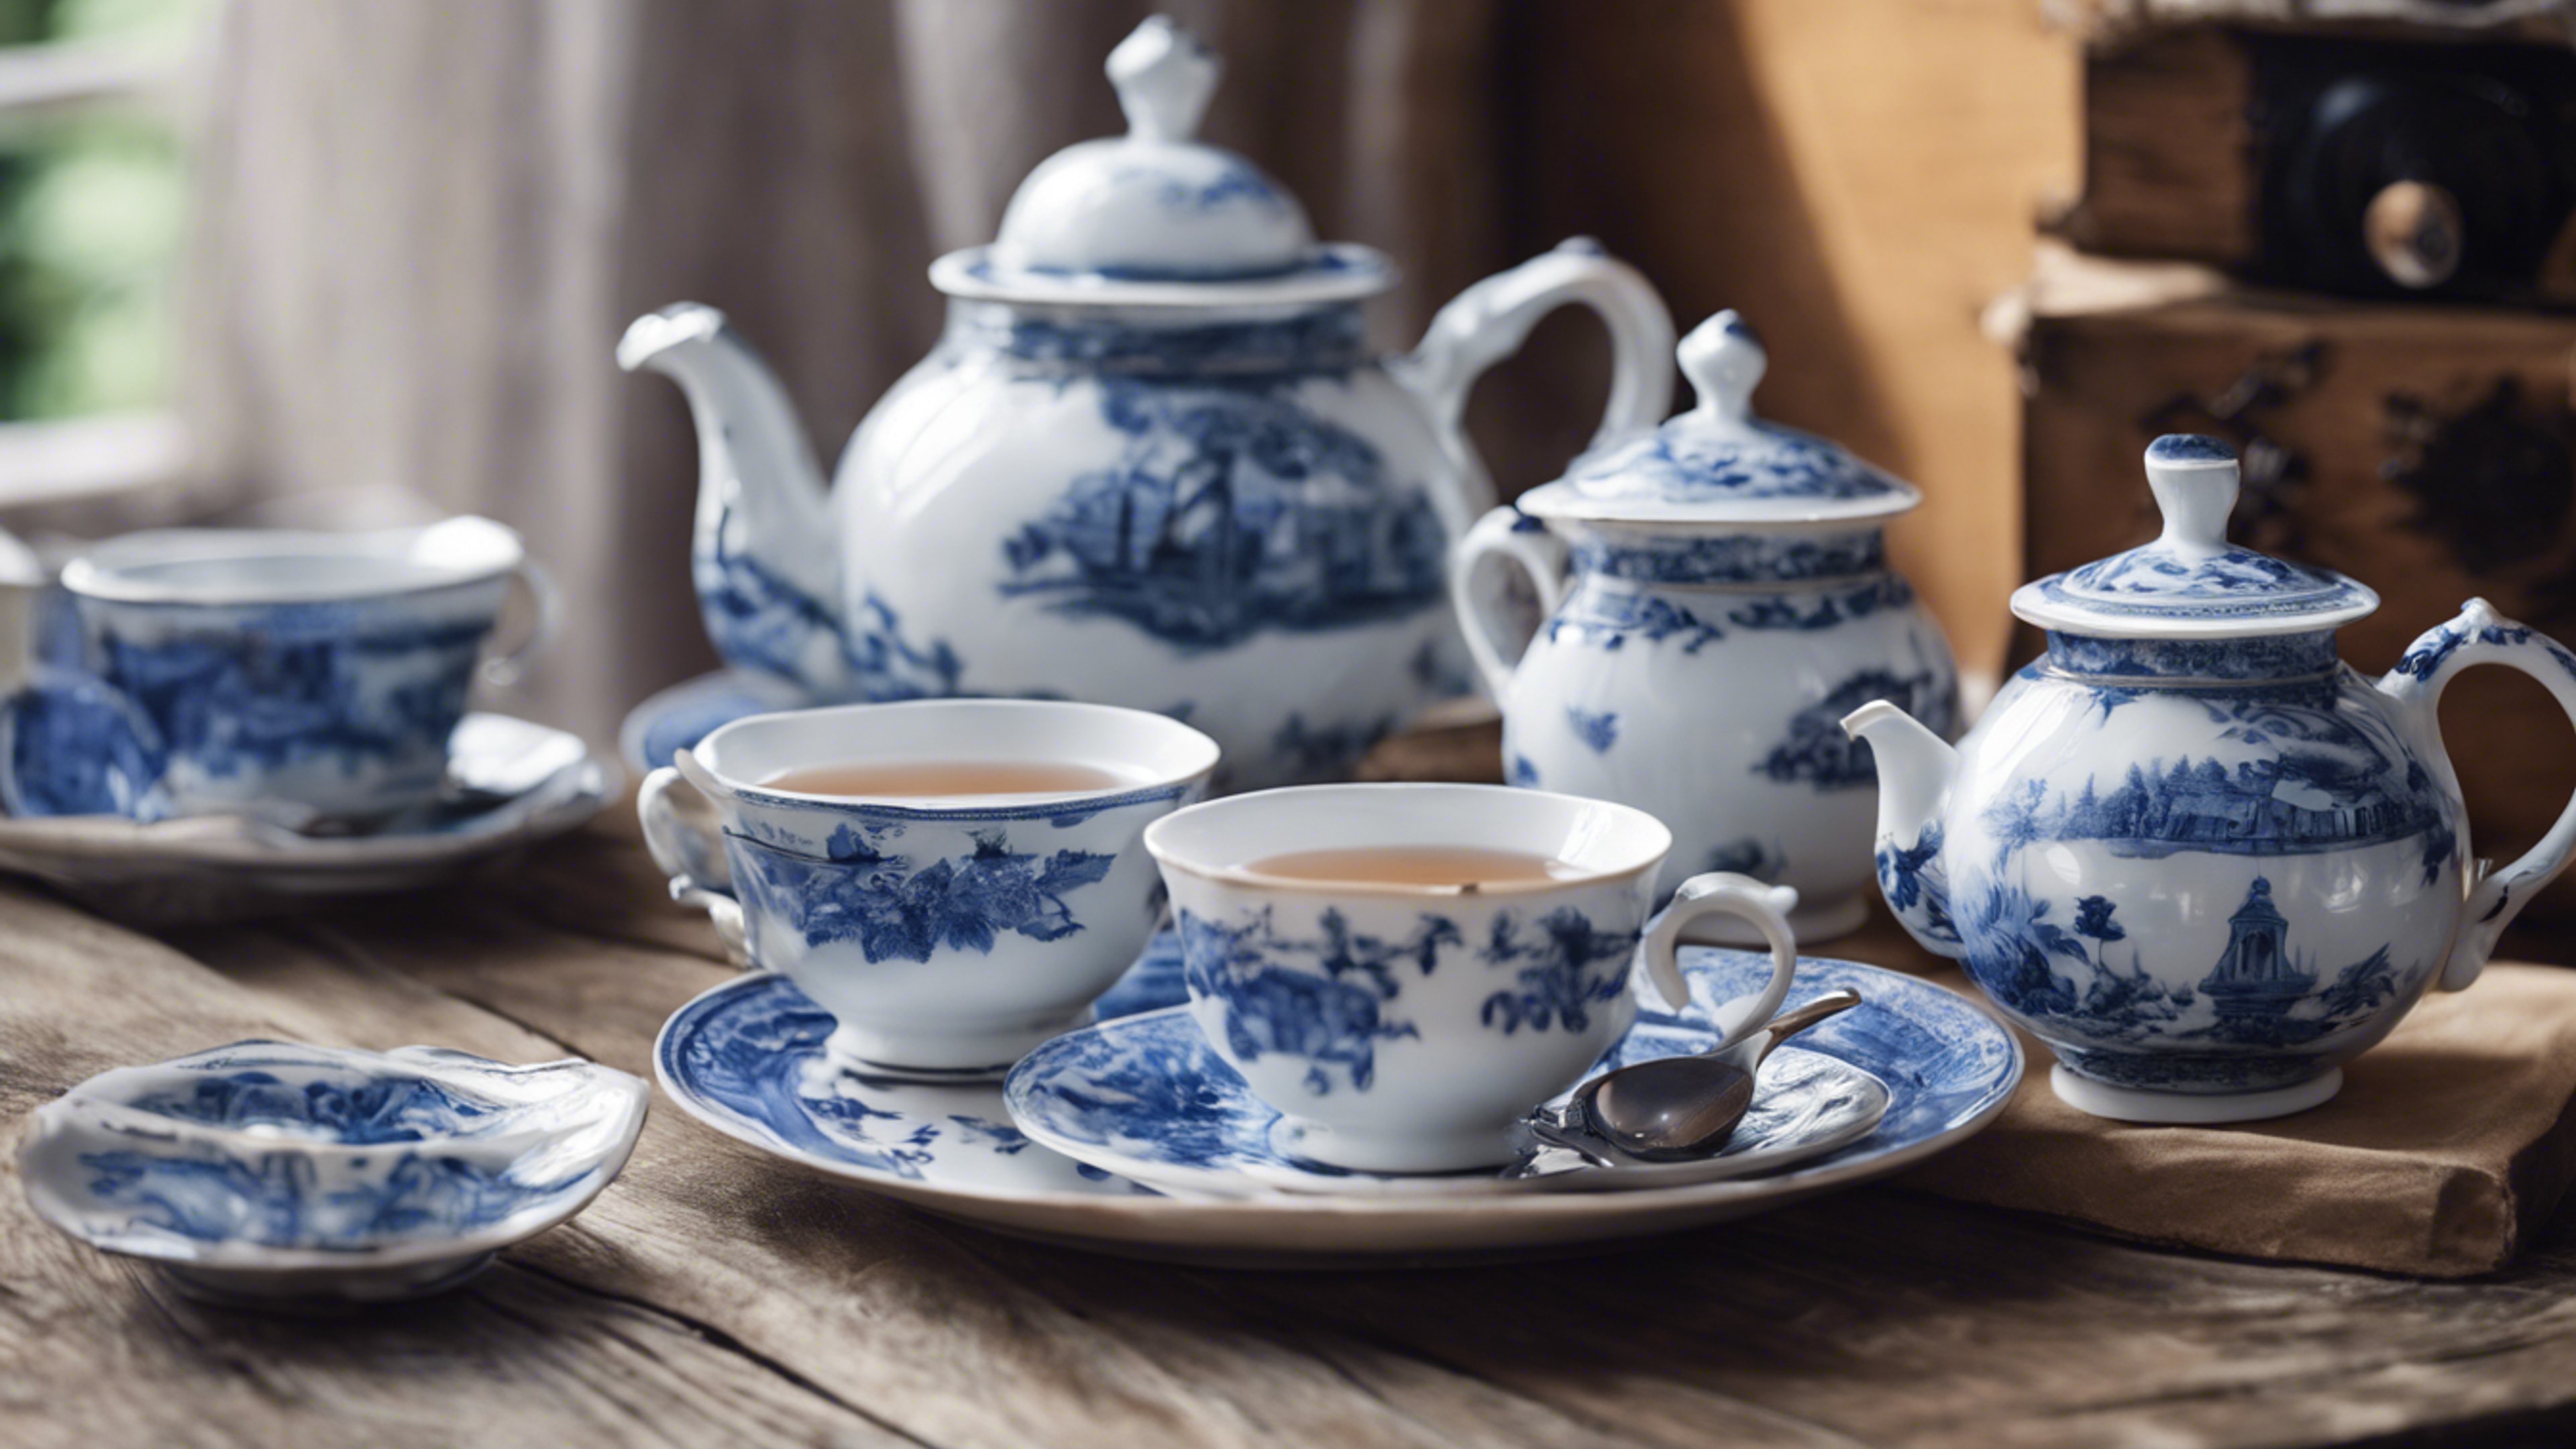 Vintage porcelain tea set in blue and white, placed on a rustic wooden table. Behang[4fbd951e4e494dd09da7]